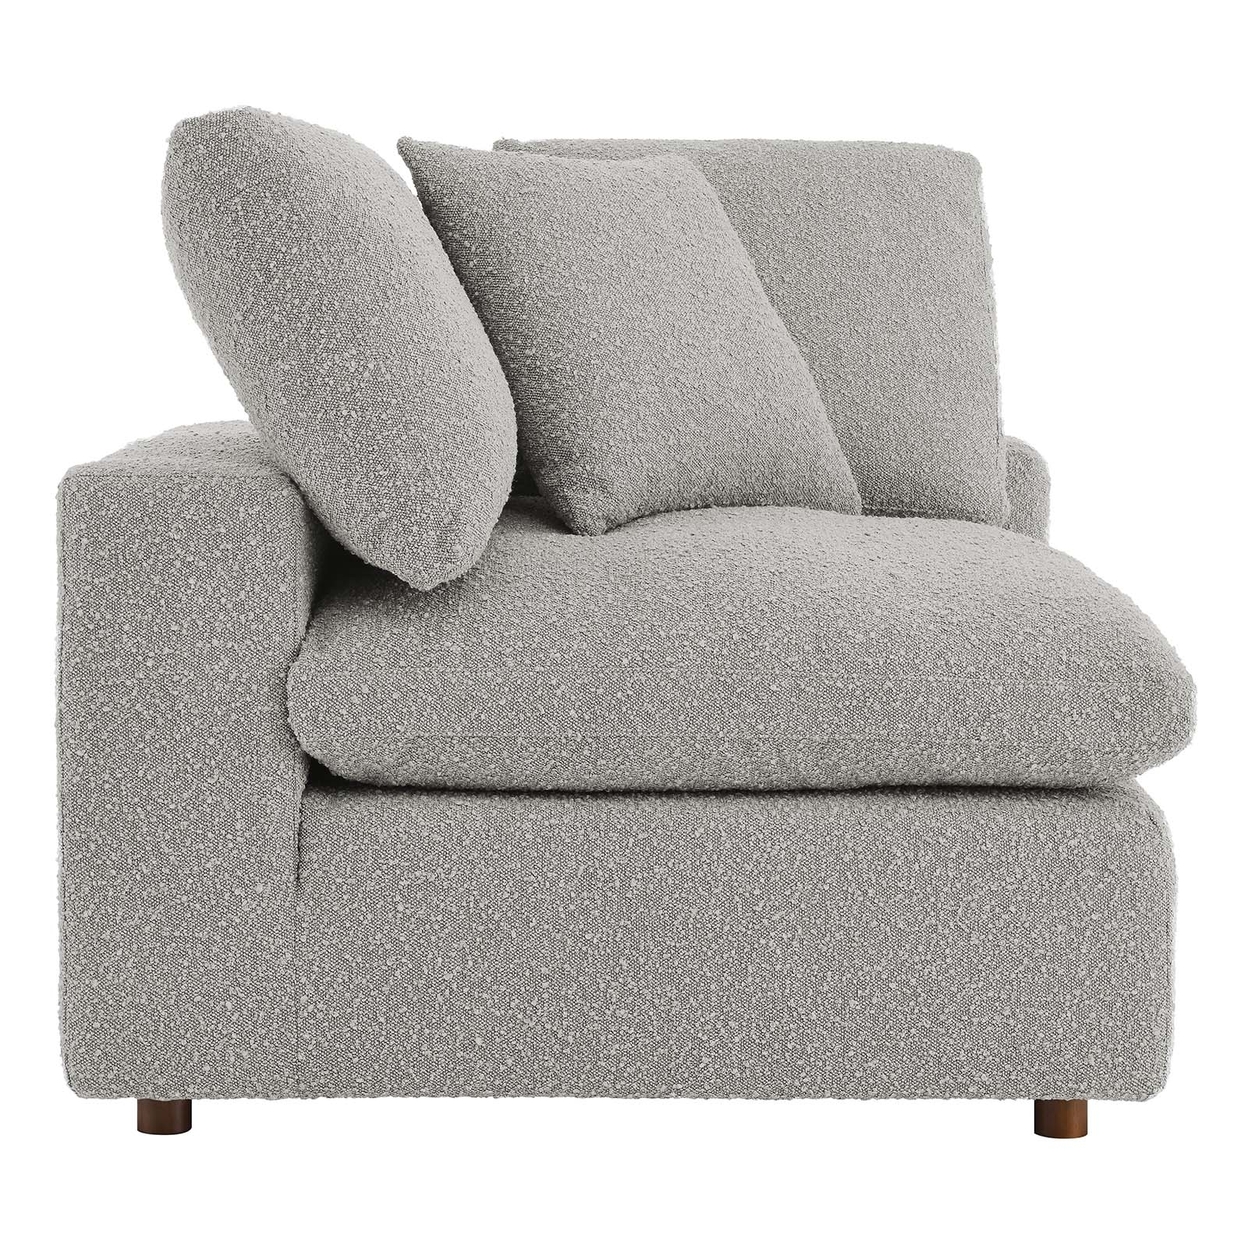 Commix Down Filled Overstuffed Boucle Fabric Corner Chair, Light Gray